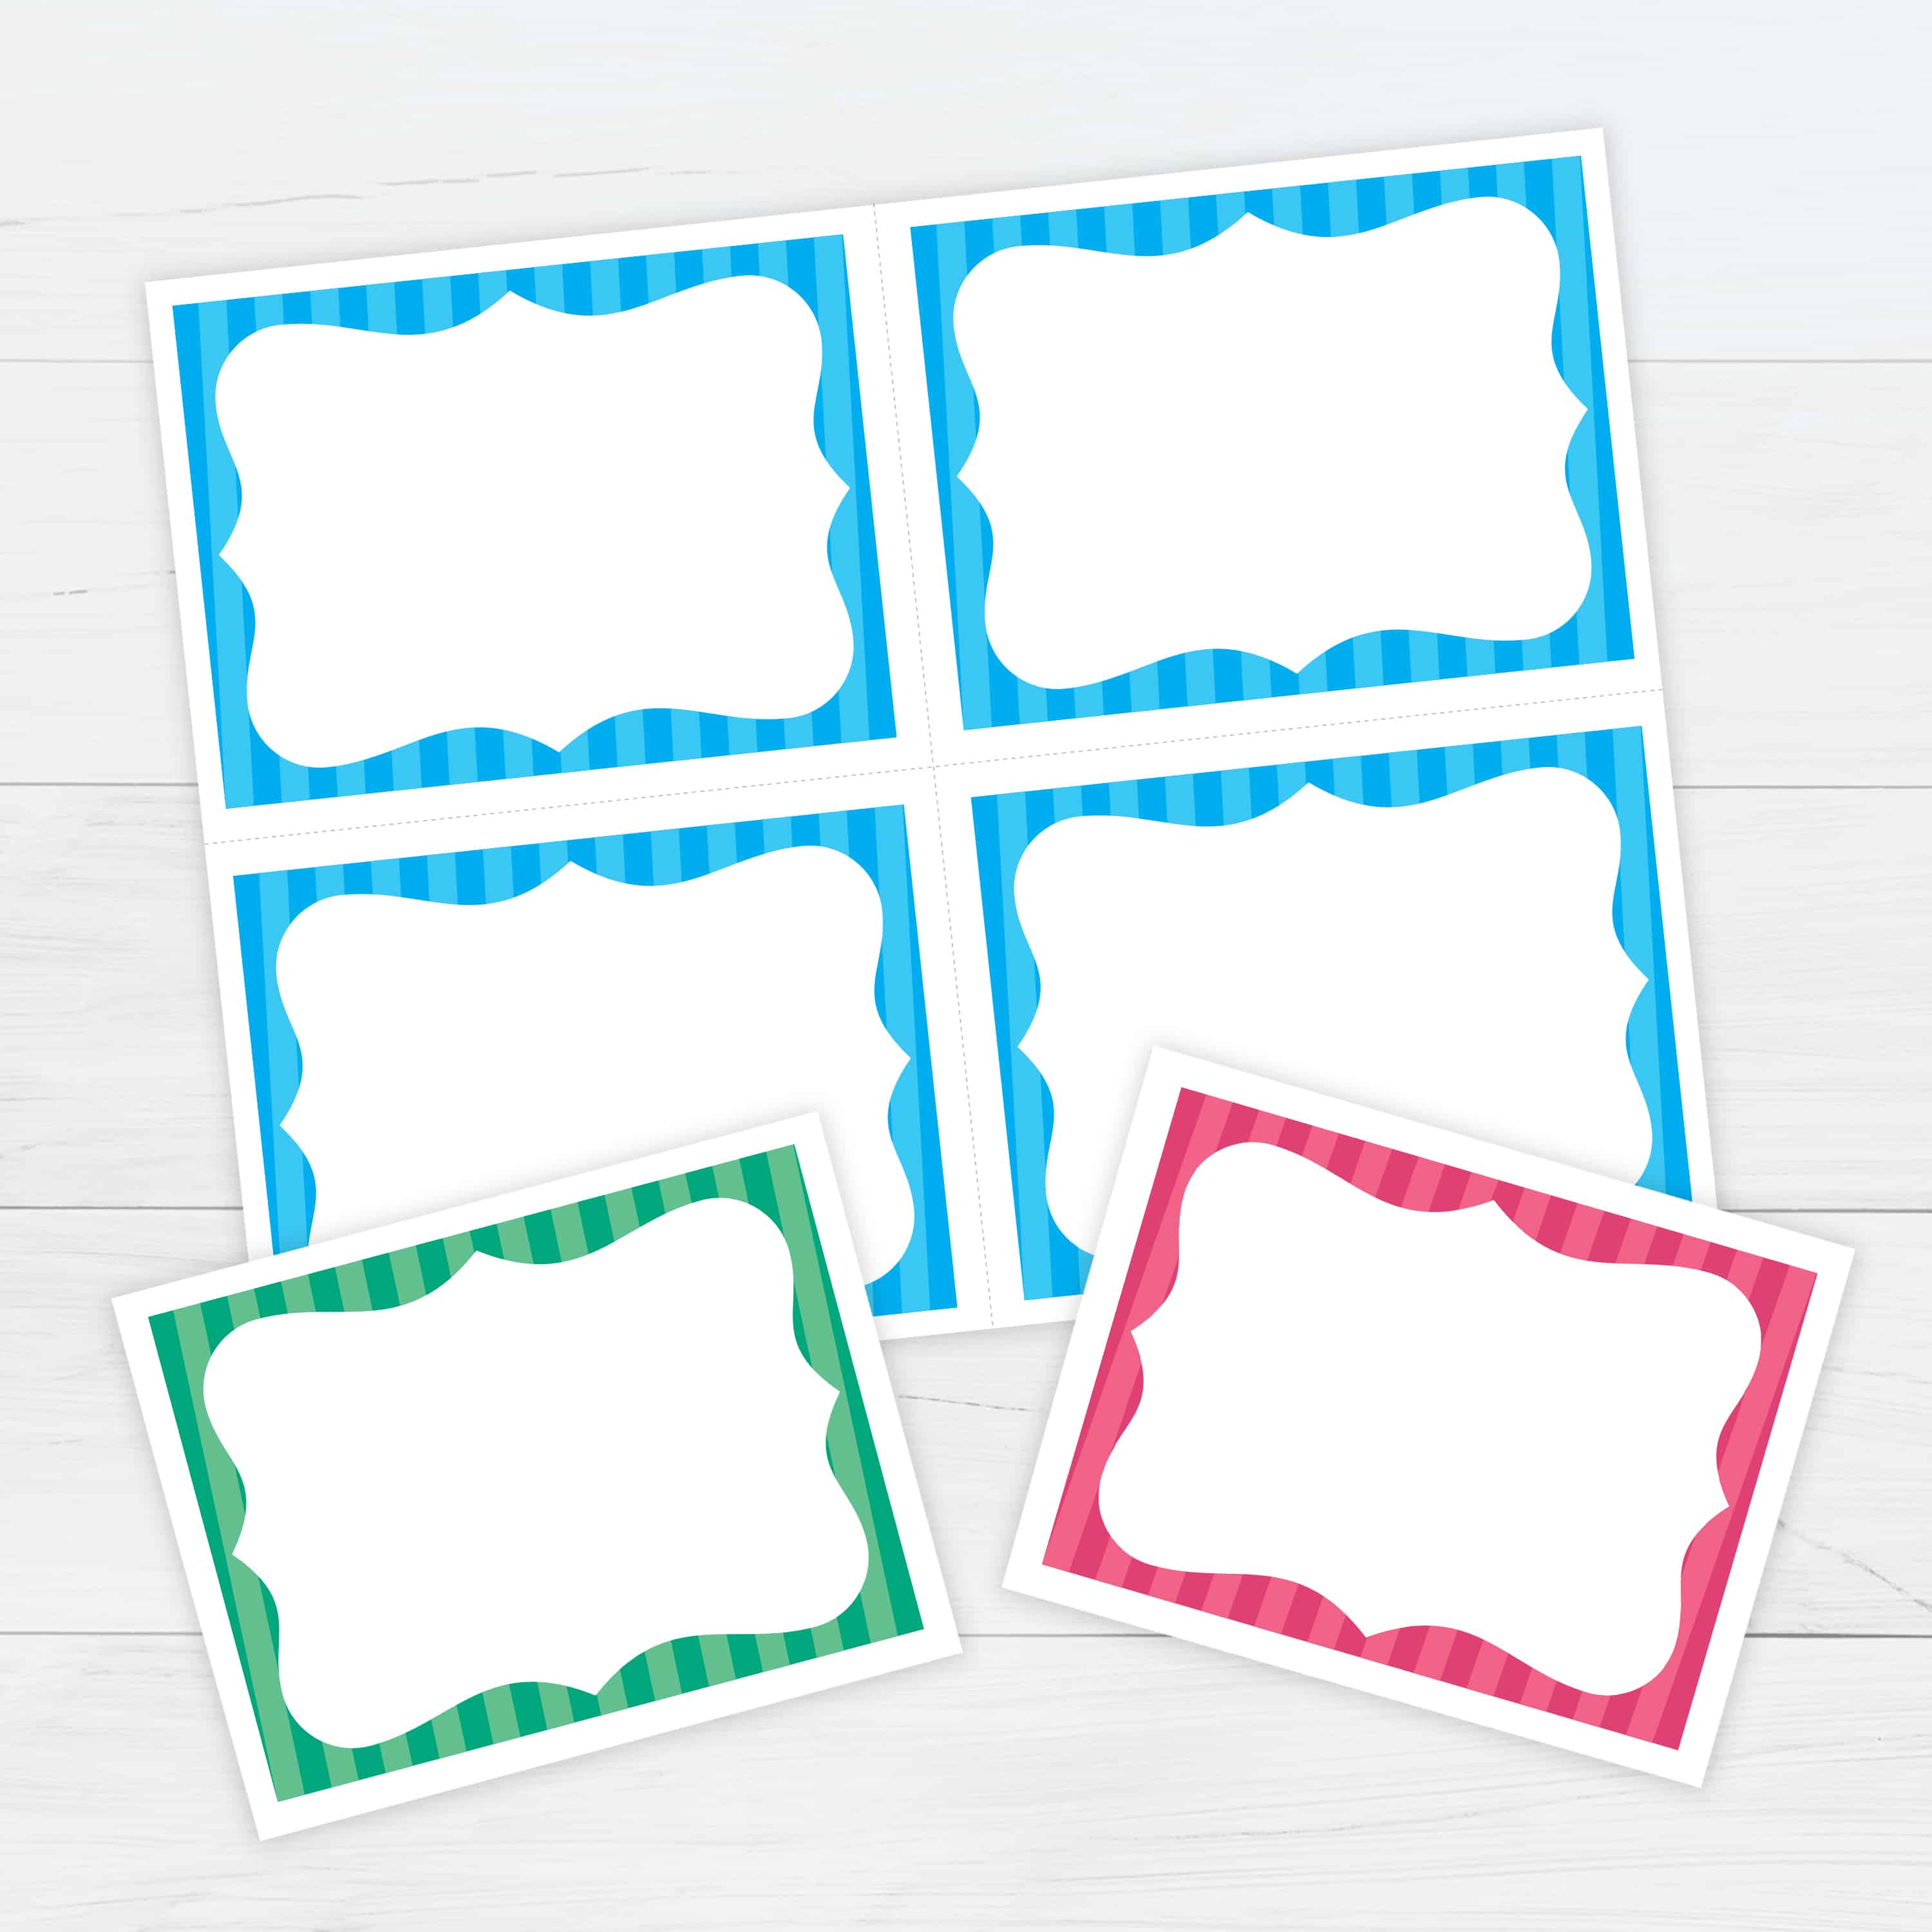 Bordered Flash cards Template 22 - Free Printable Download Throughout Queue Cards Template